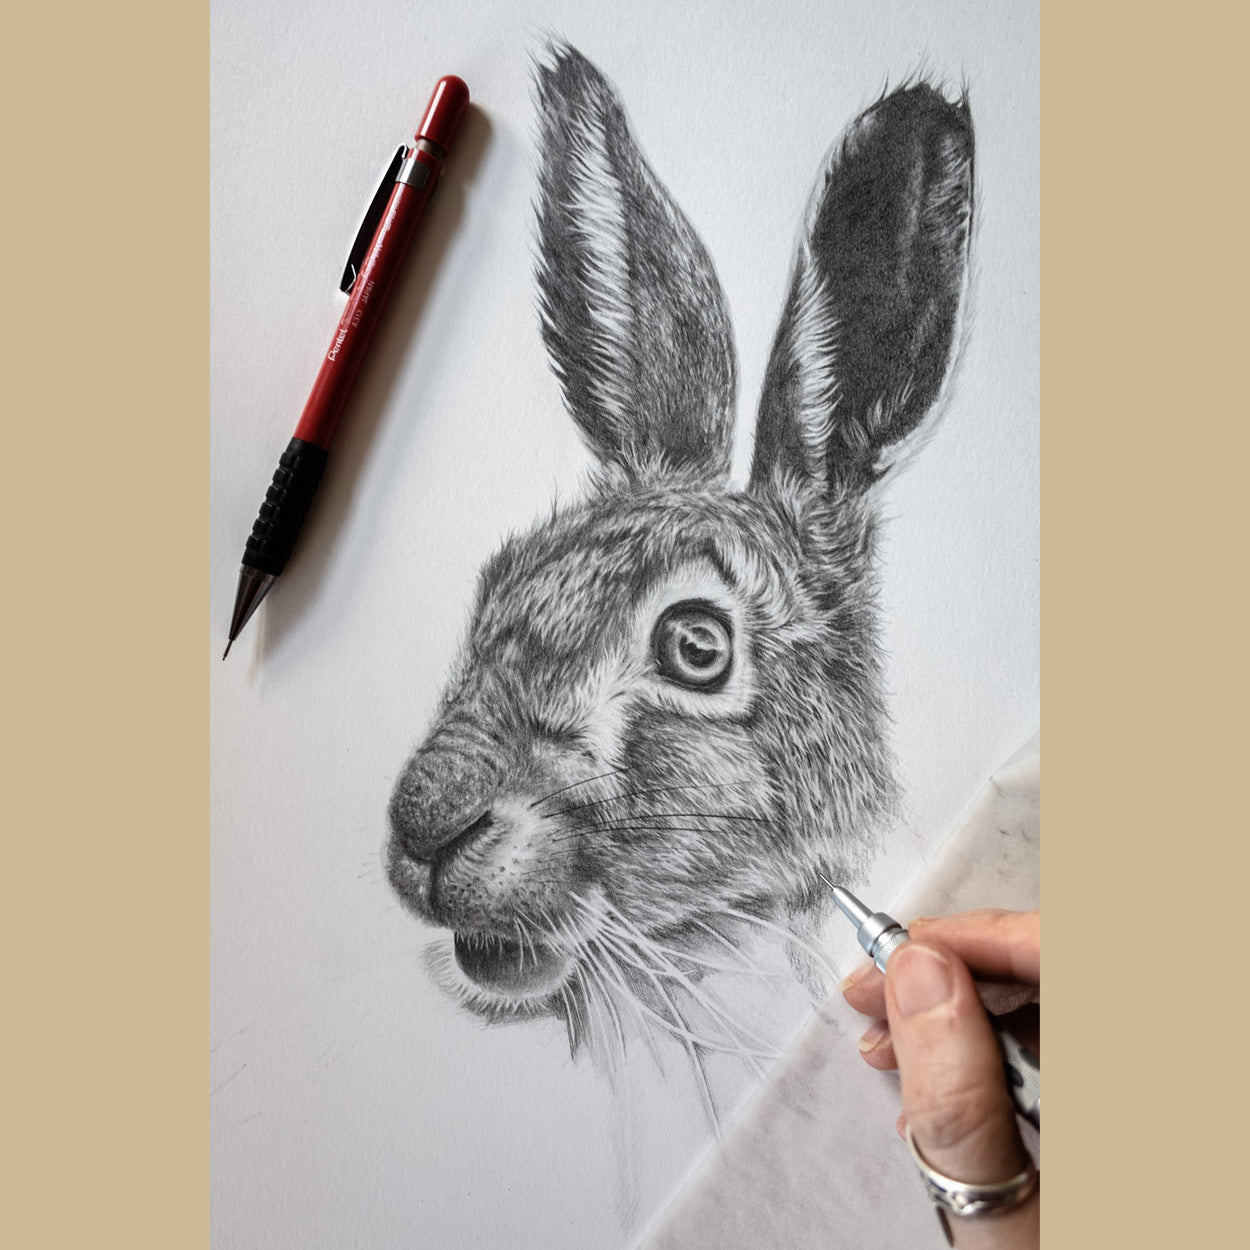 Hare Pencil Drawing in Progress - The Thriving Wild - Jill Dimond